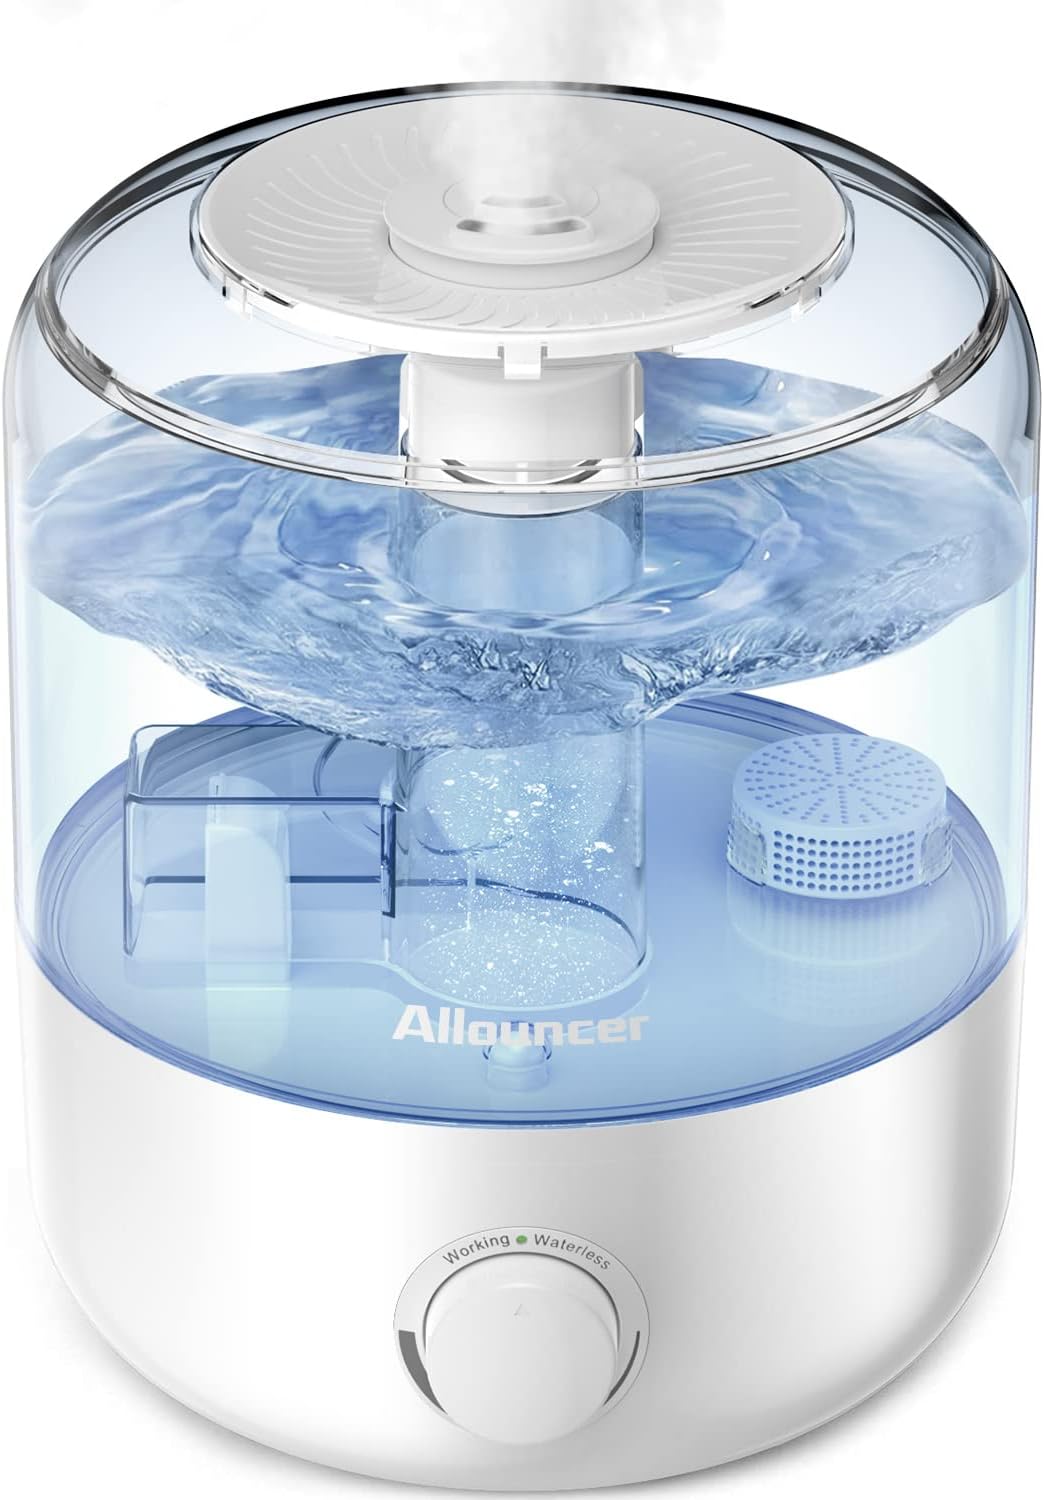 Humidifiers for Bedroom, Top Fill 2.5L Large Water Tank, Auto Shut-Off, Super Quiet Cool Mist Humidifiers for Baby, Ultrasonic Air Humidifier for Large Room with 360 Double Rotating Nozzles